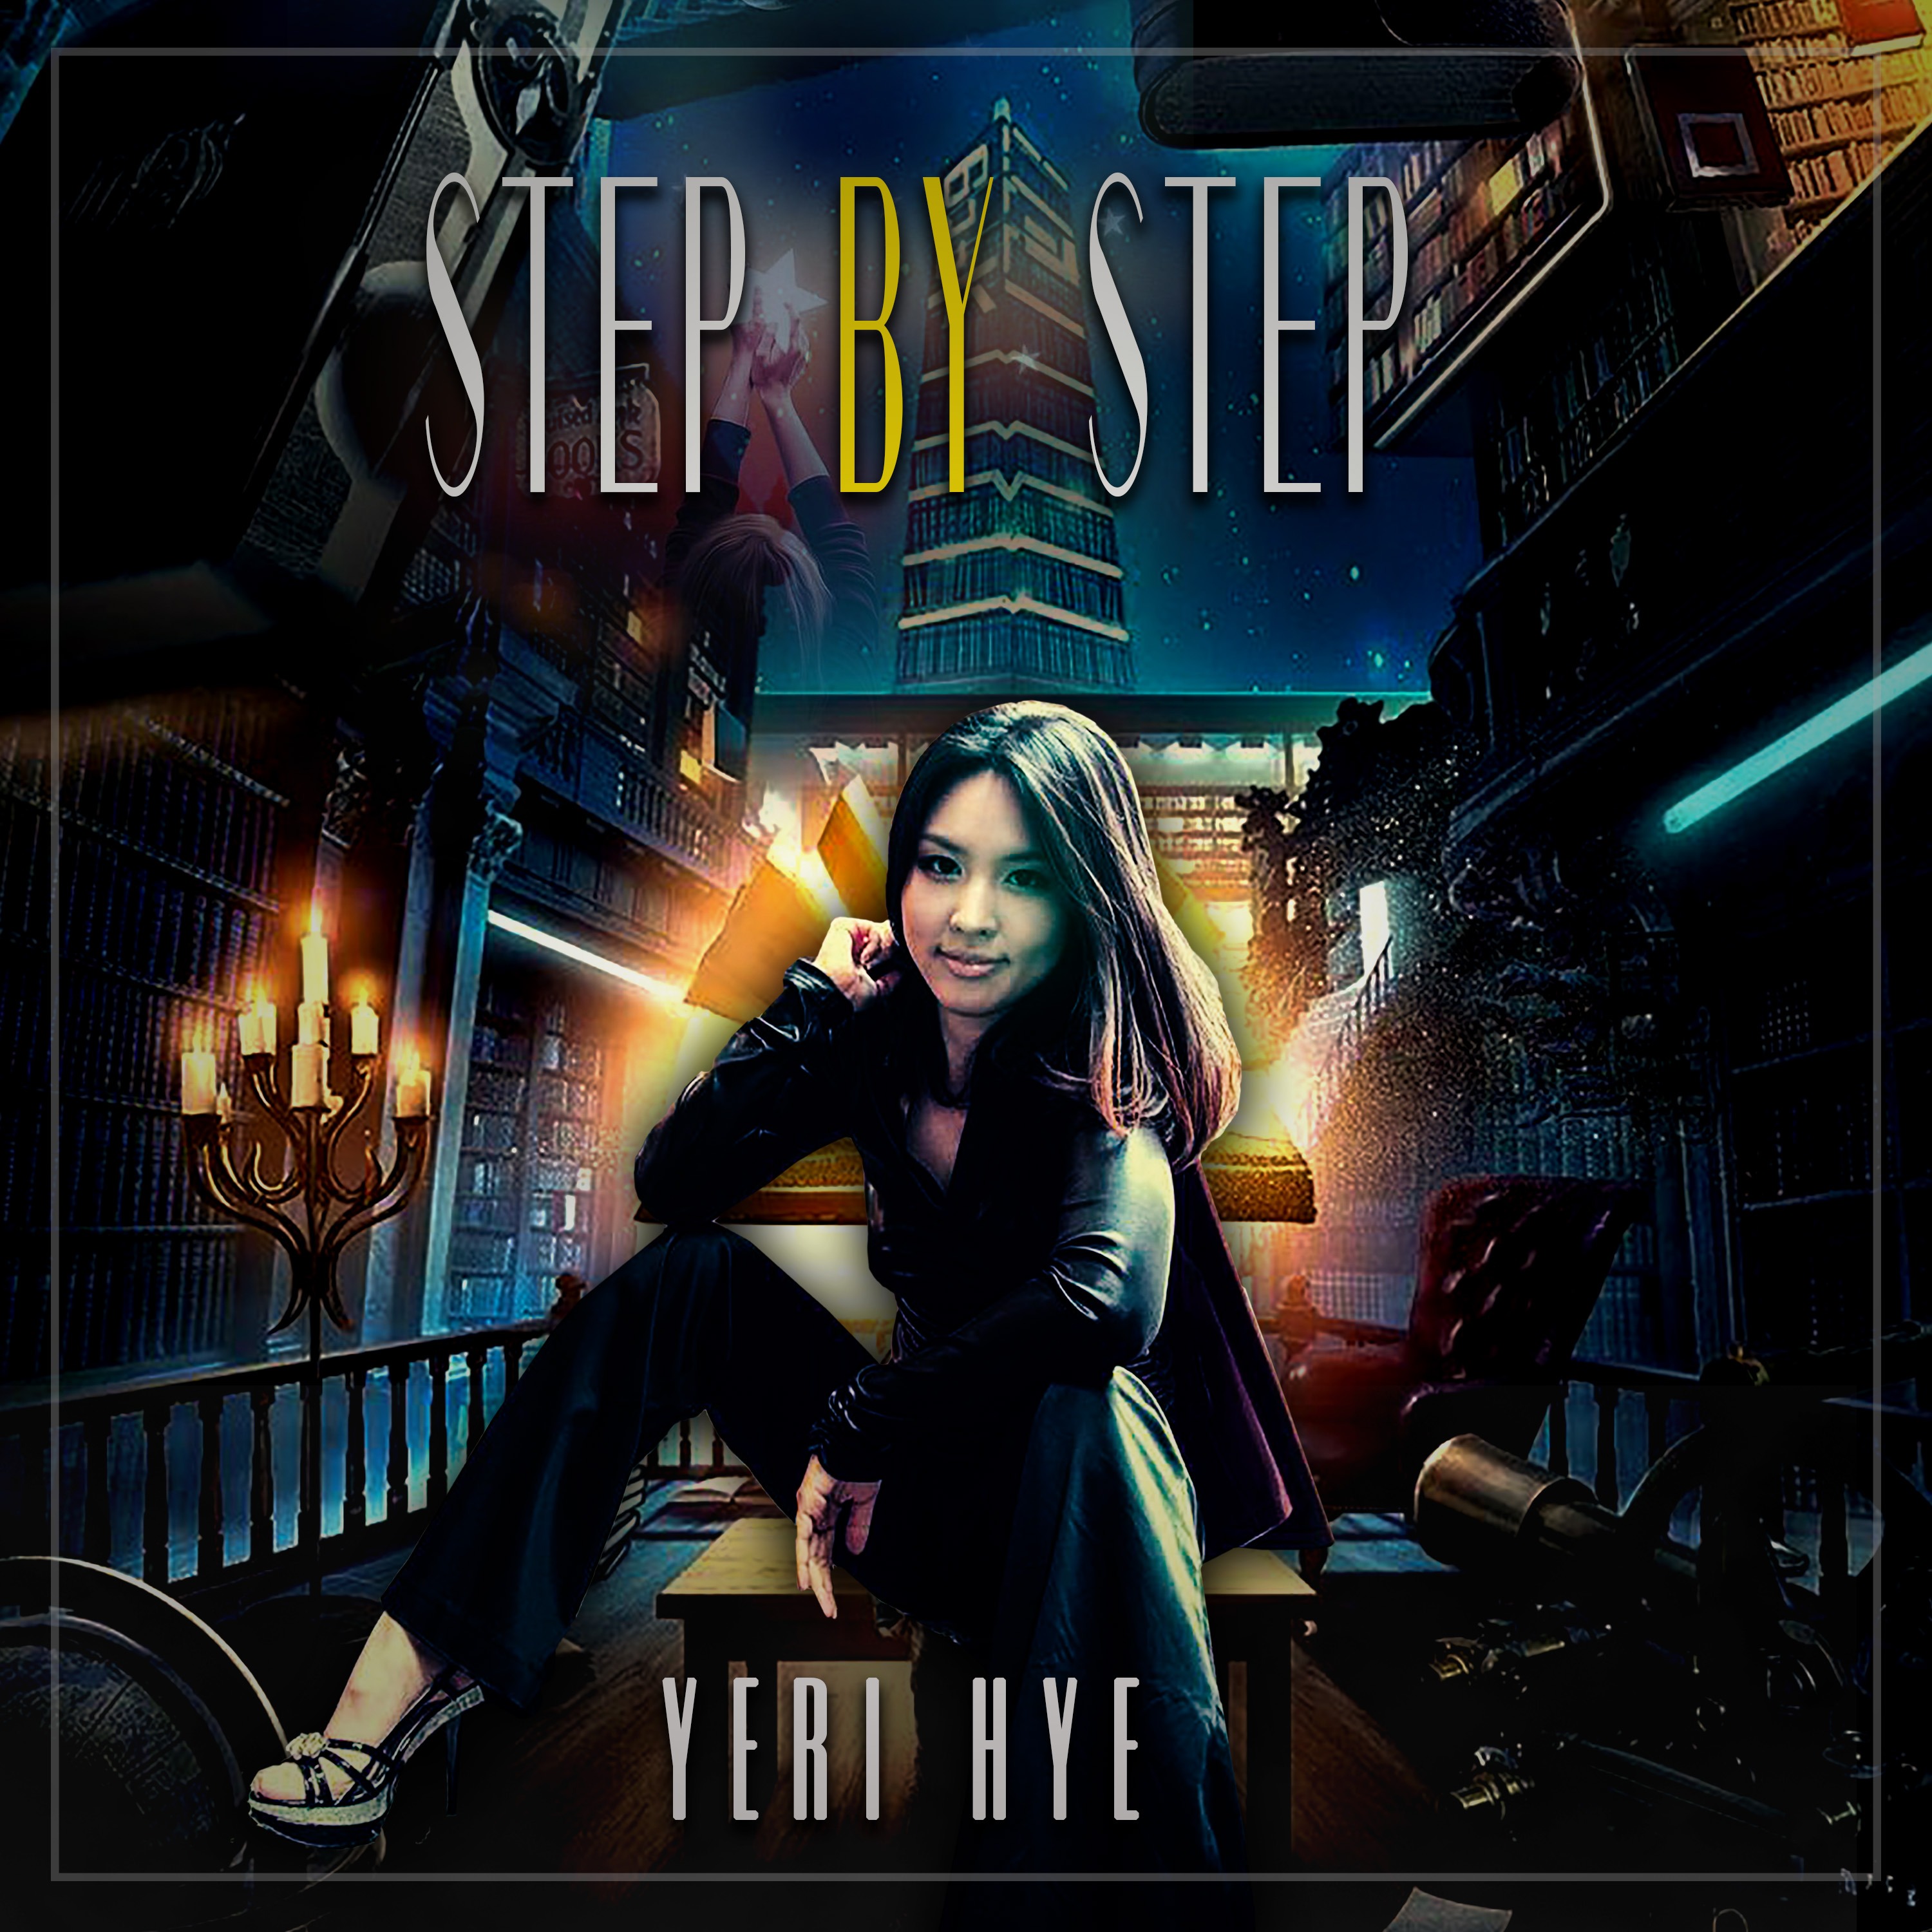 Sparking a Fearless Motivation to Search for Happiness - Yeri Hye Enthralls All with Upbeat Pop Track "Step by Step"